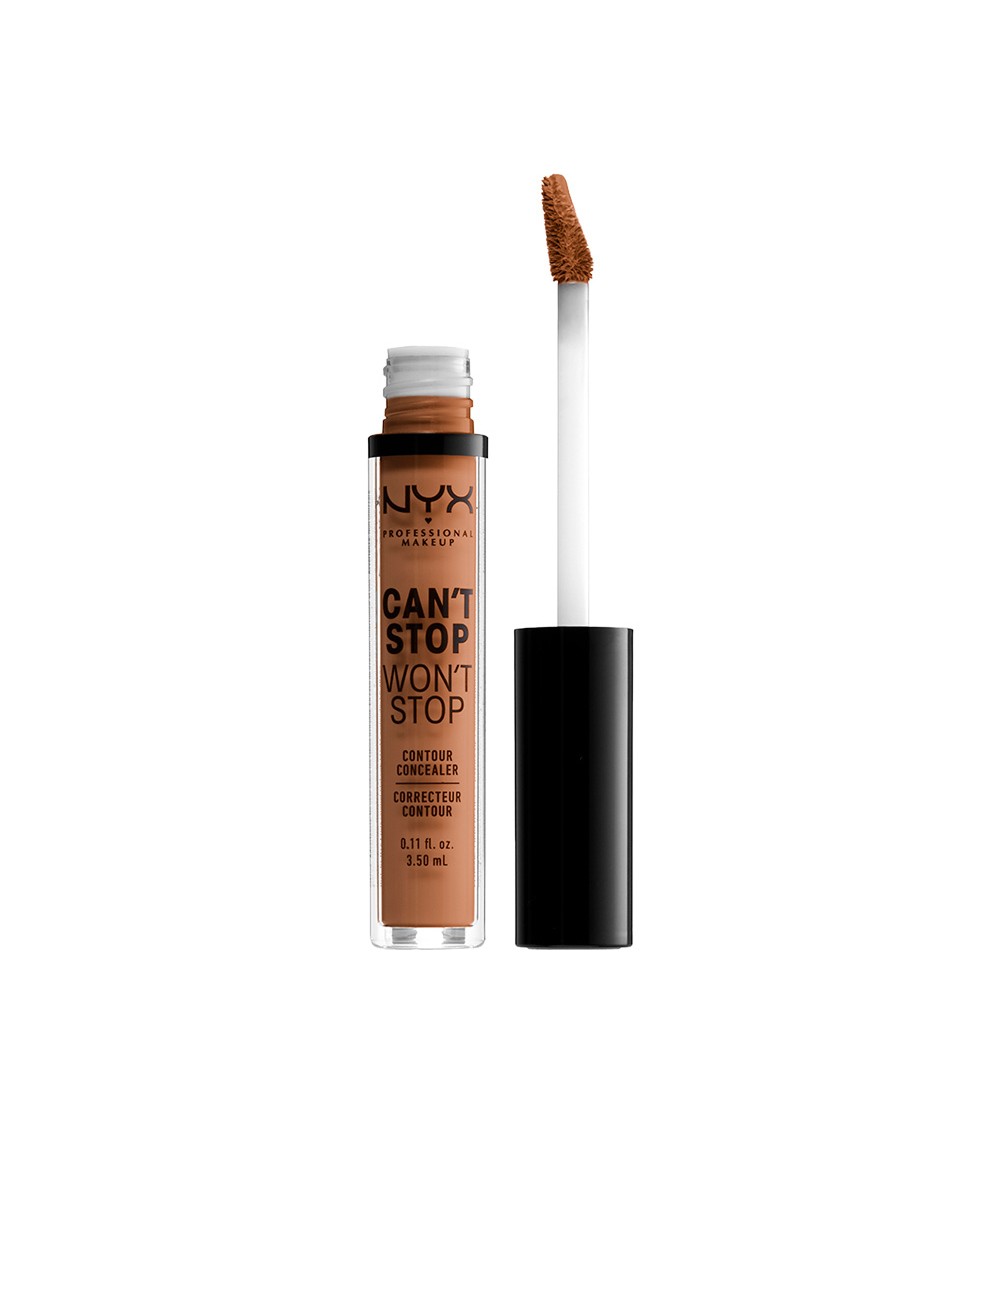 CAN'T STOP WON'T STOP contour concealer mahogany 3,5 ml